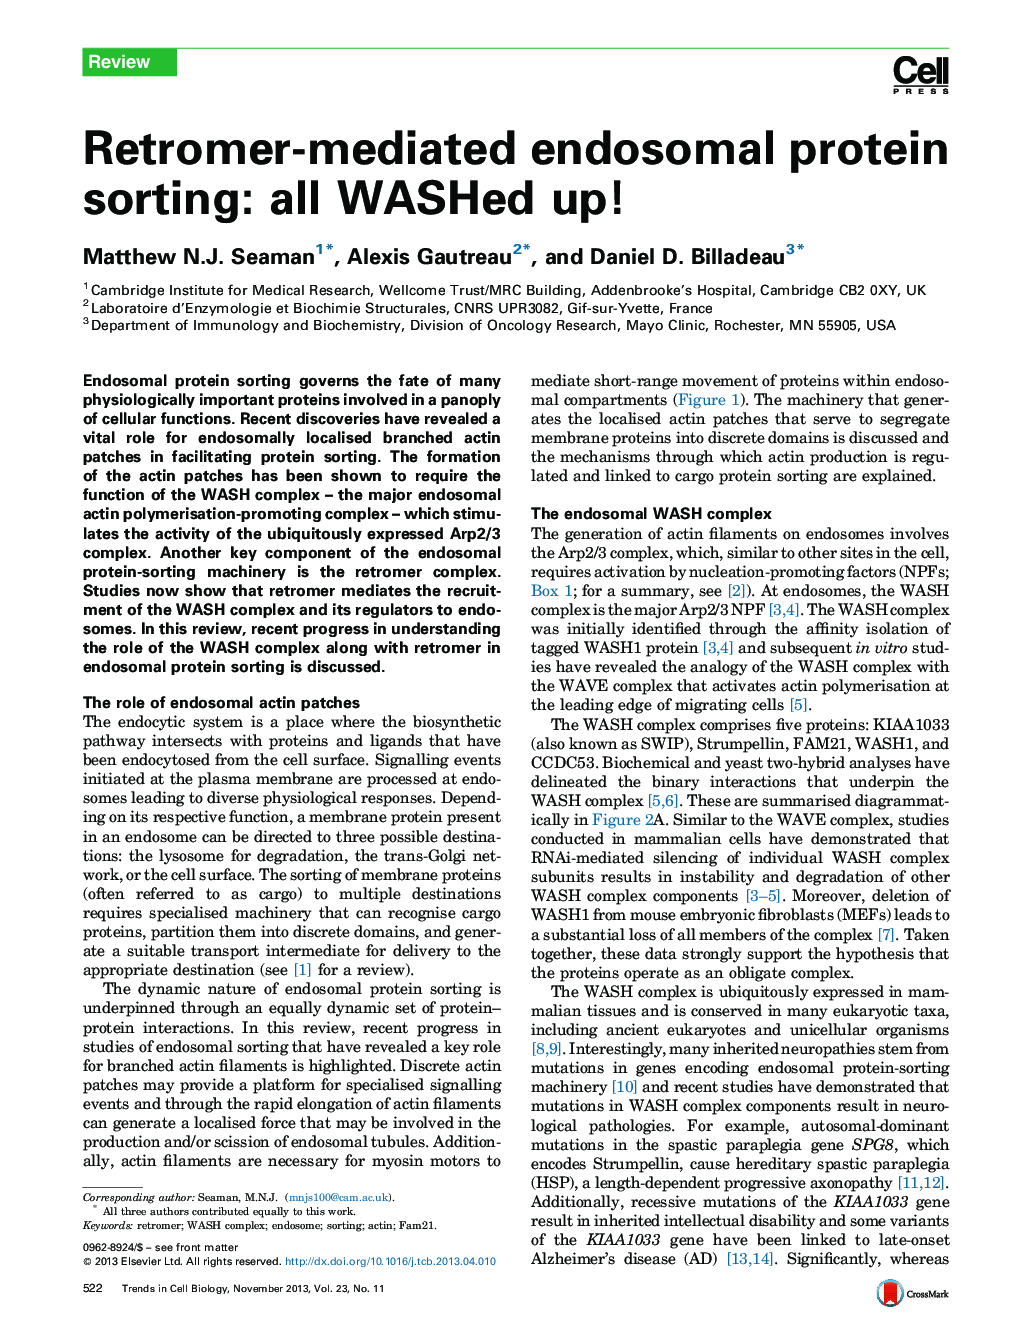 Retromer-mediated endosomal protein sorting: all WASHed up!